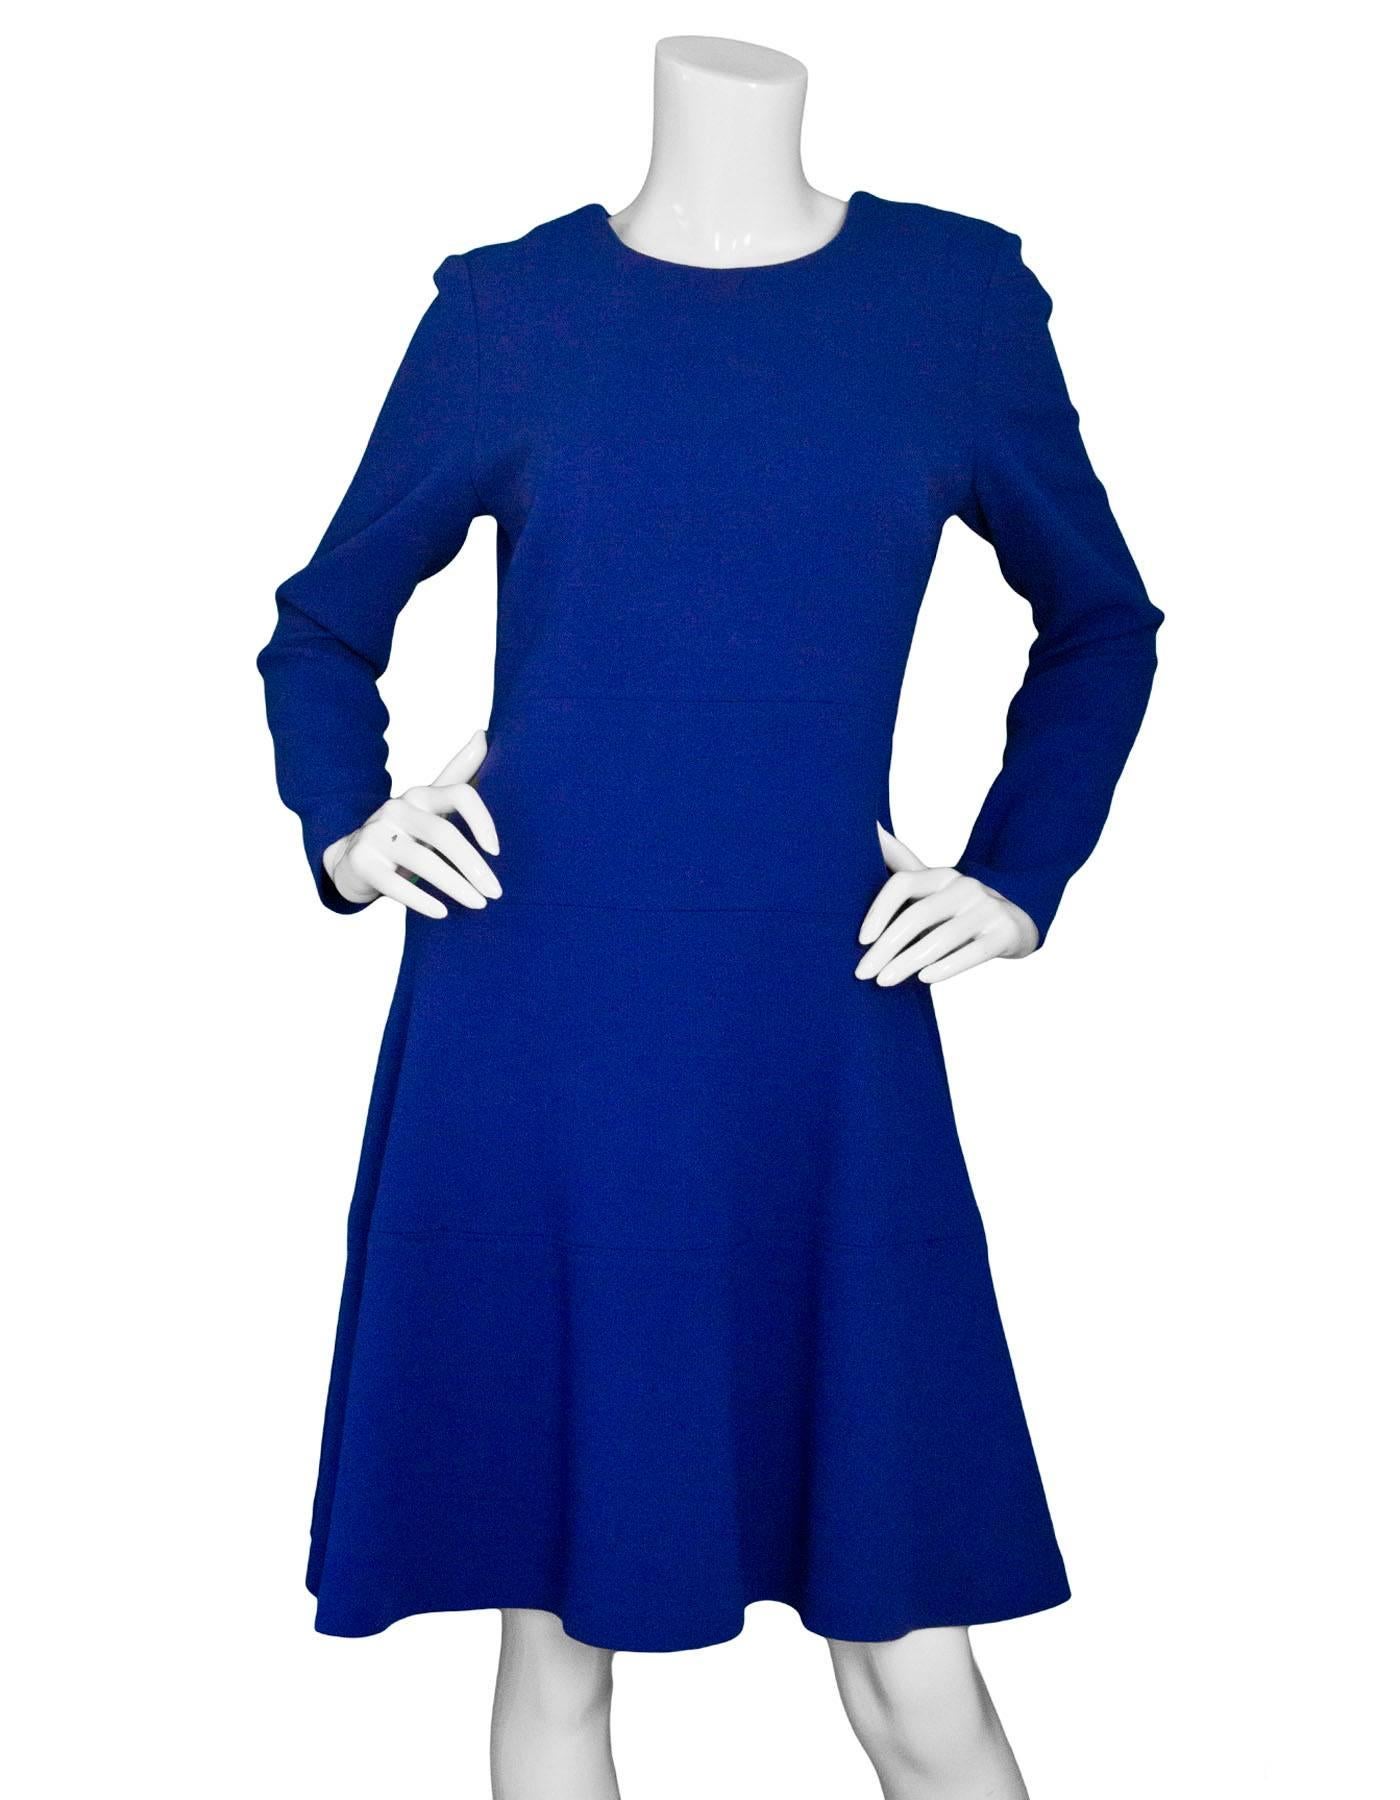 Lela Rose Blue Wool Flare Dress Sz 10

Made In: USA
Color: Blue
Composition: 93% Wool, 5% nylon, 2% elastane 
Closure/Opening: Back zip closure
Overall Condition: Excellent pre-owned condition 
Marked Size: 10
Bust: 32